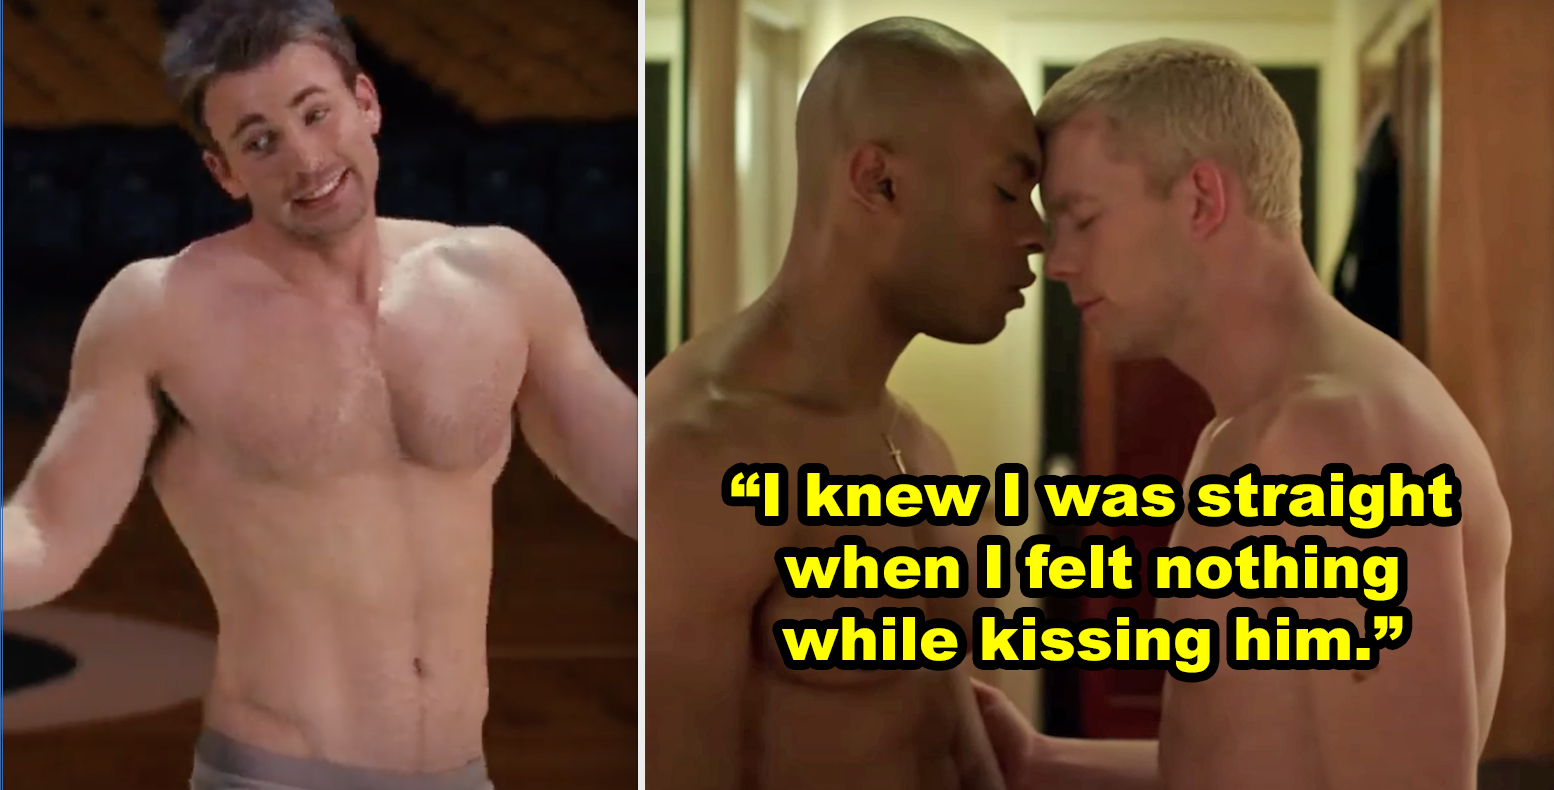 17 Straight Men Reveal Gay Hookup/Sex Experiences pic